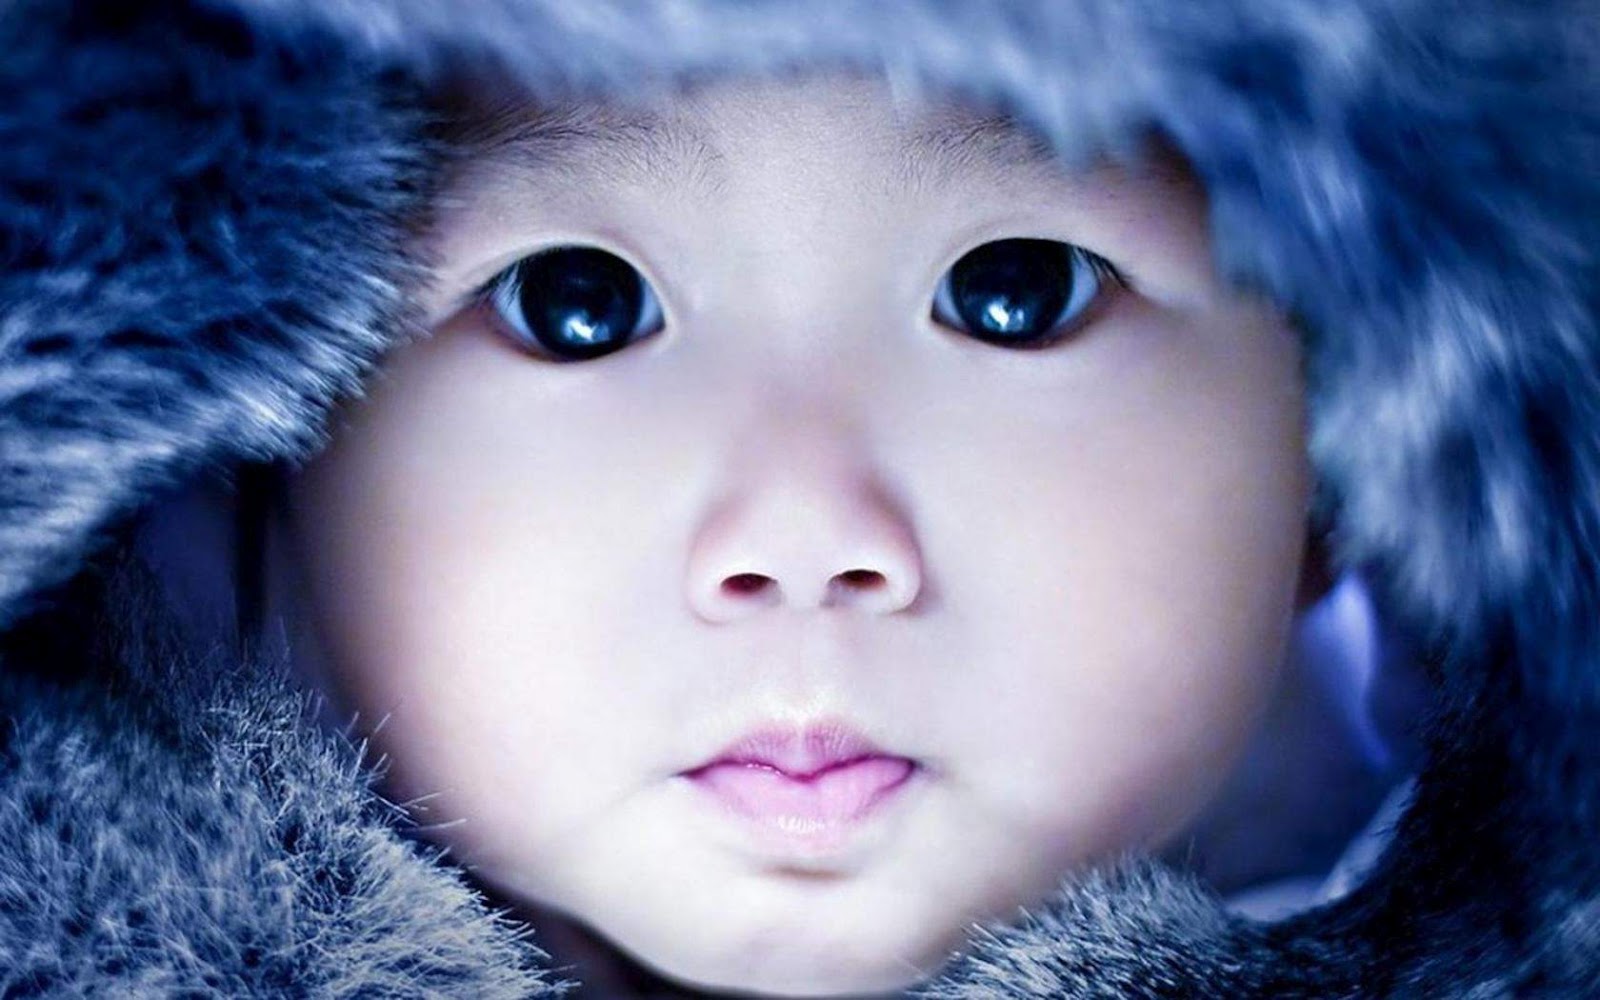 ... baby pictures wallpapers, Baby wallpapers for mobile, Baby pictures